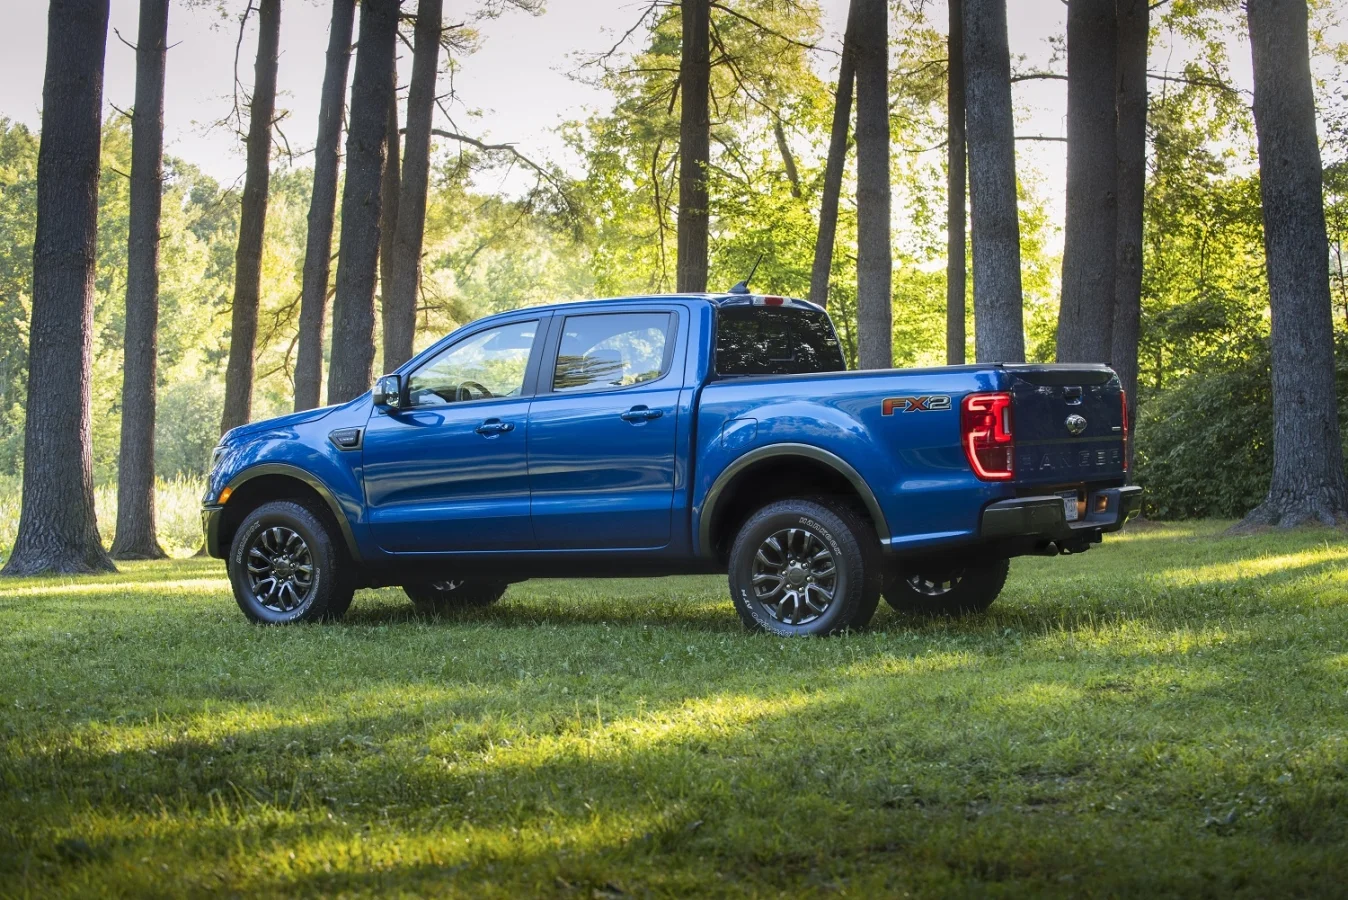 ford-ranger-discount-offers-up-to-5-500-off-in-june-2021